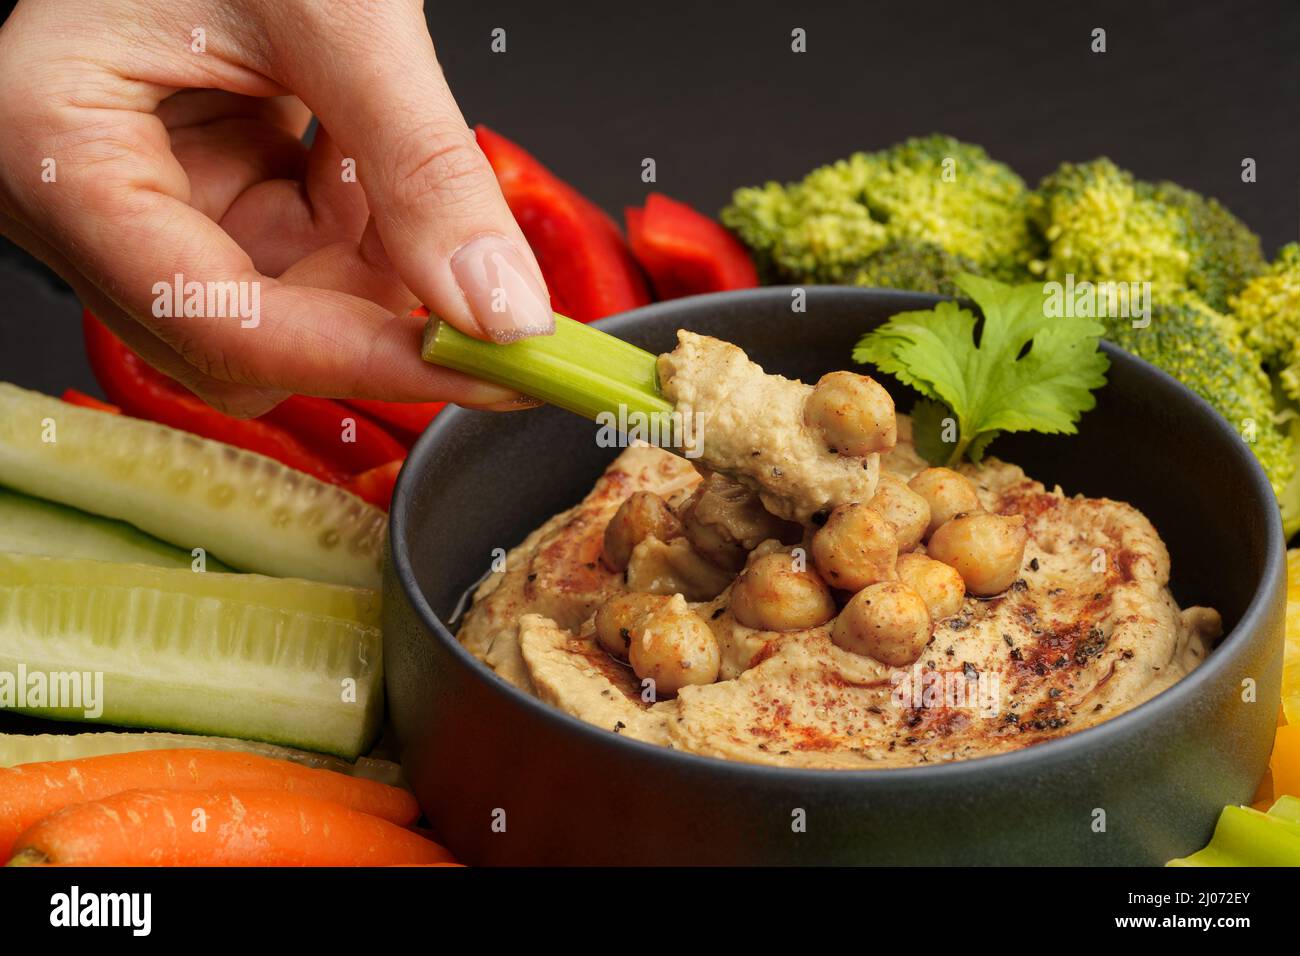 Woman hand taking chickpeas hummus with celery stick. Tasty hummus with fresh vegetables Stock Photo